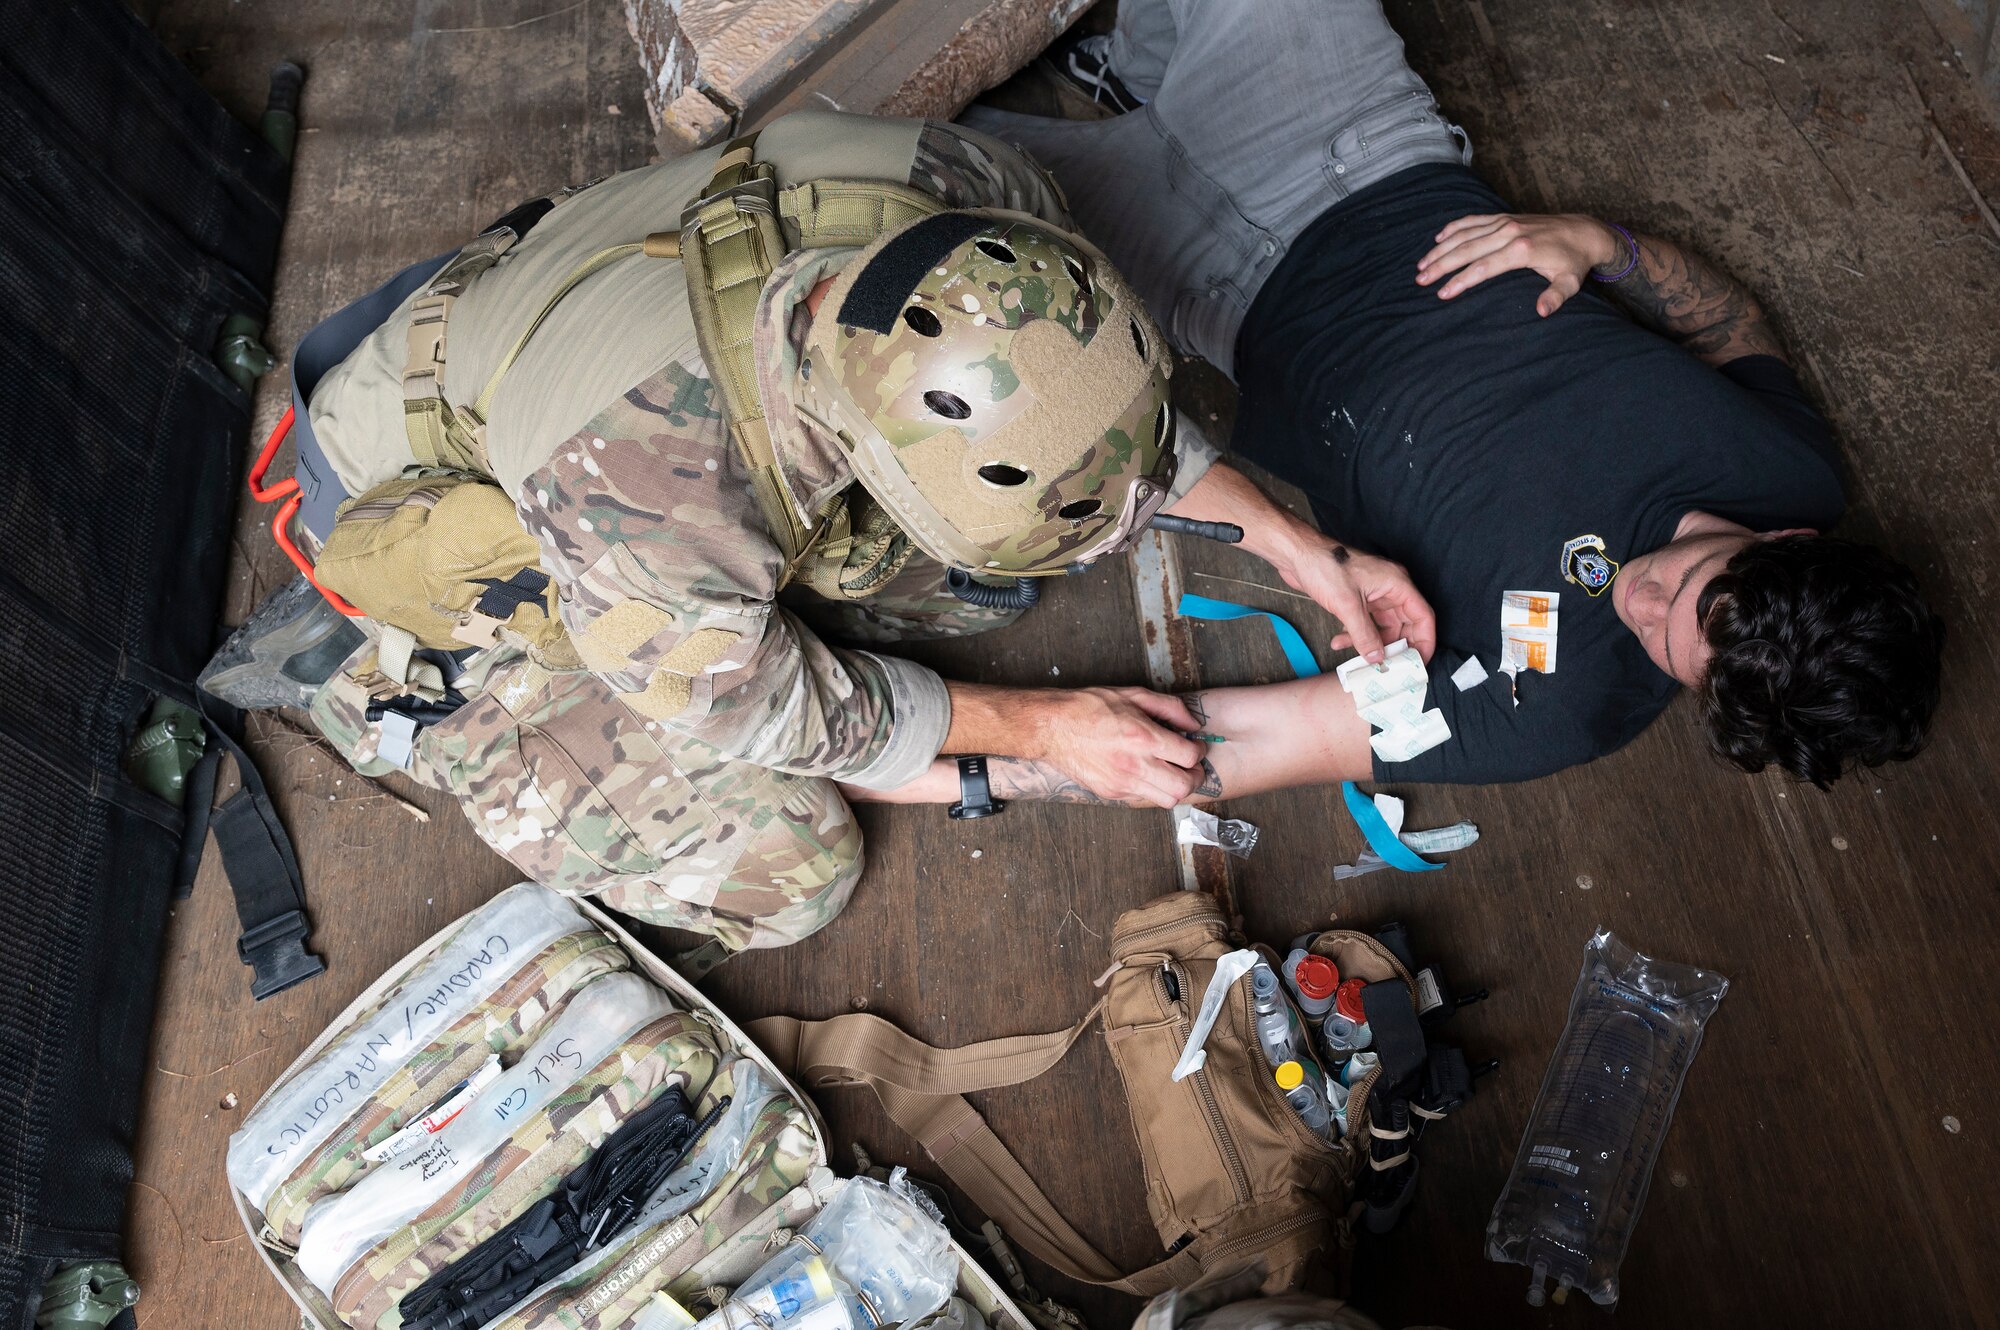 We look down from above at a Special Tactics Operator applying a dressing to a victim's left arm during training.